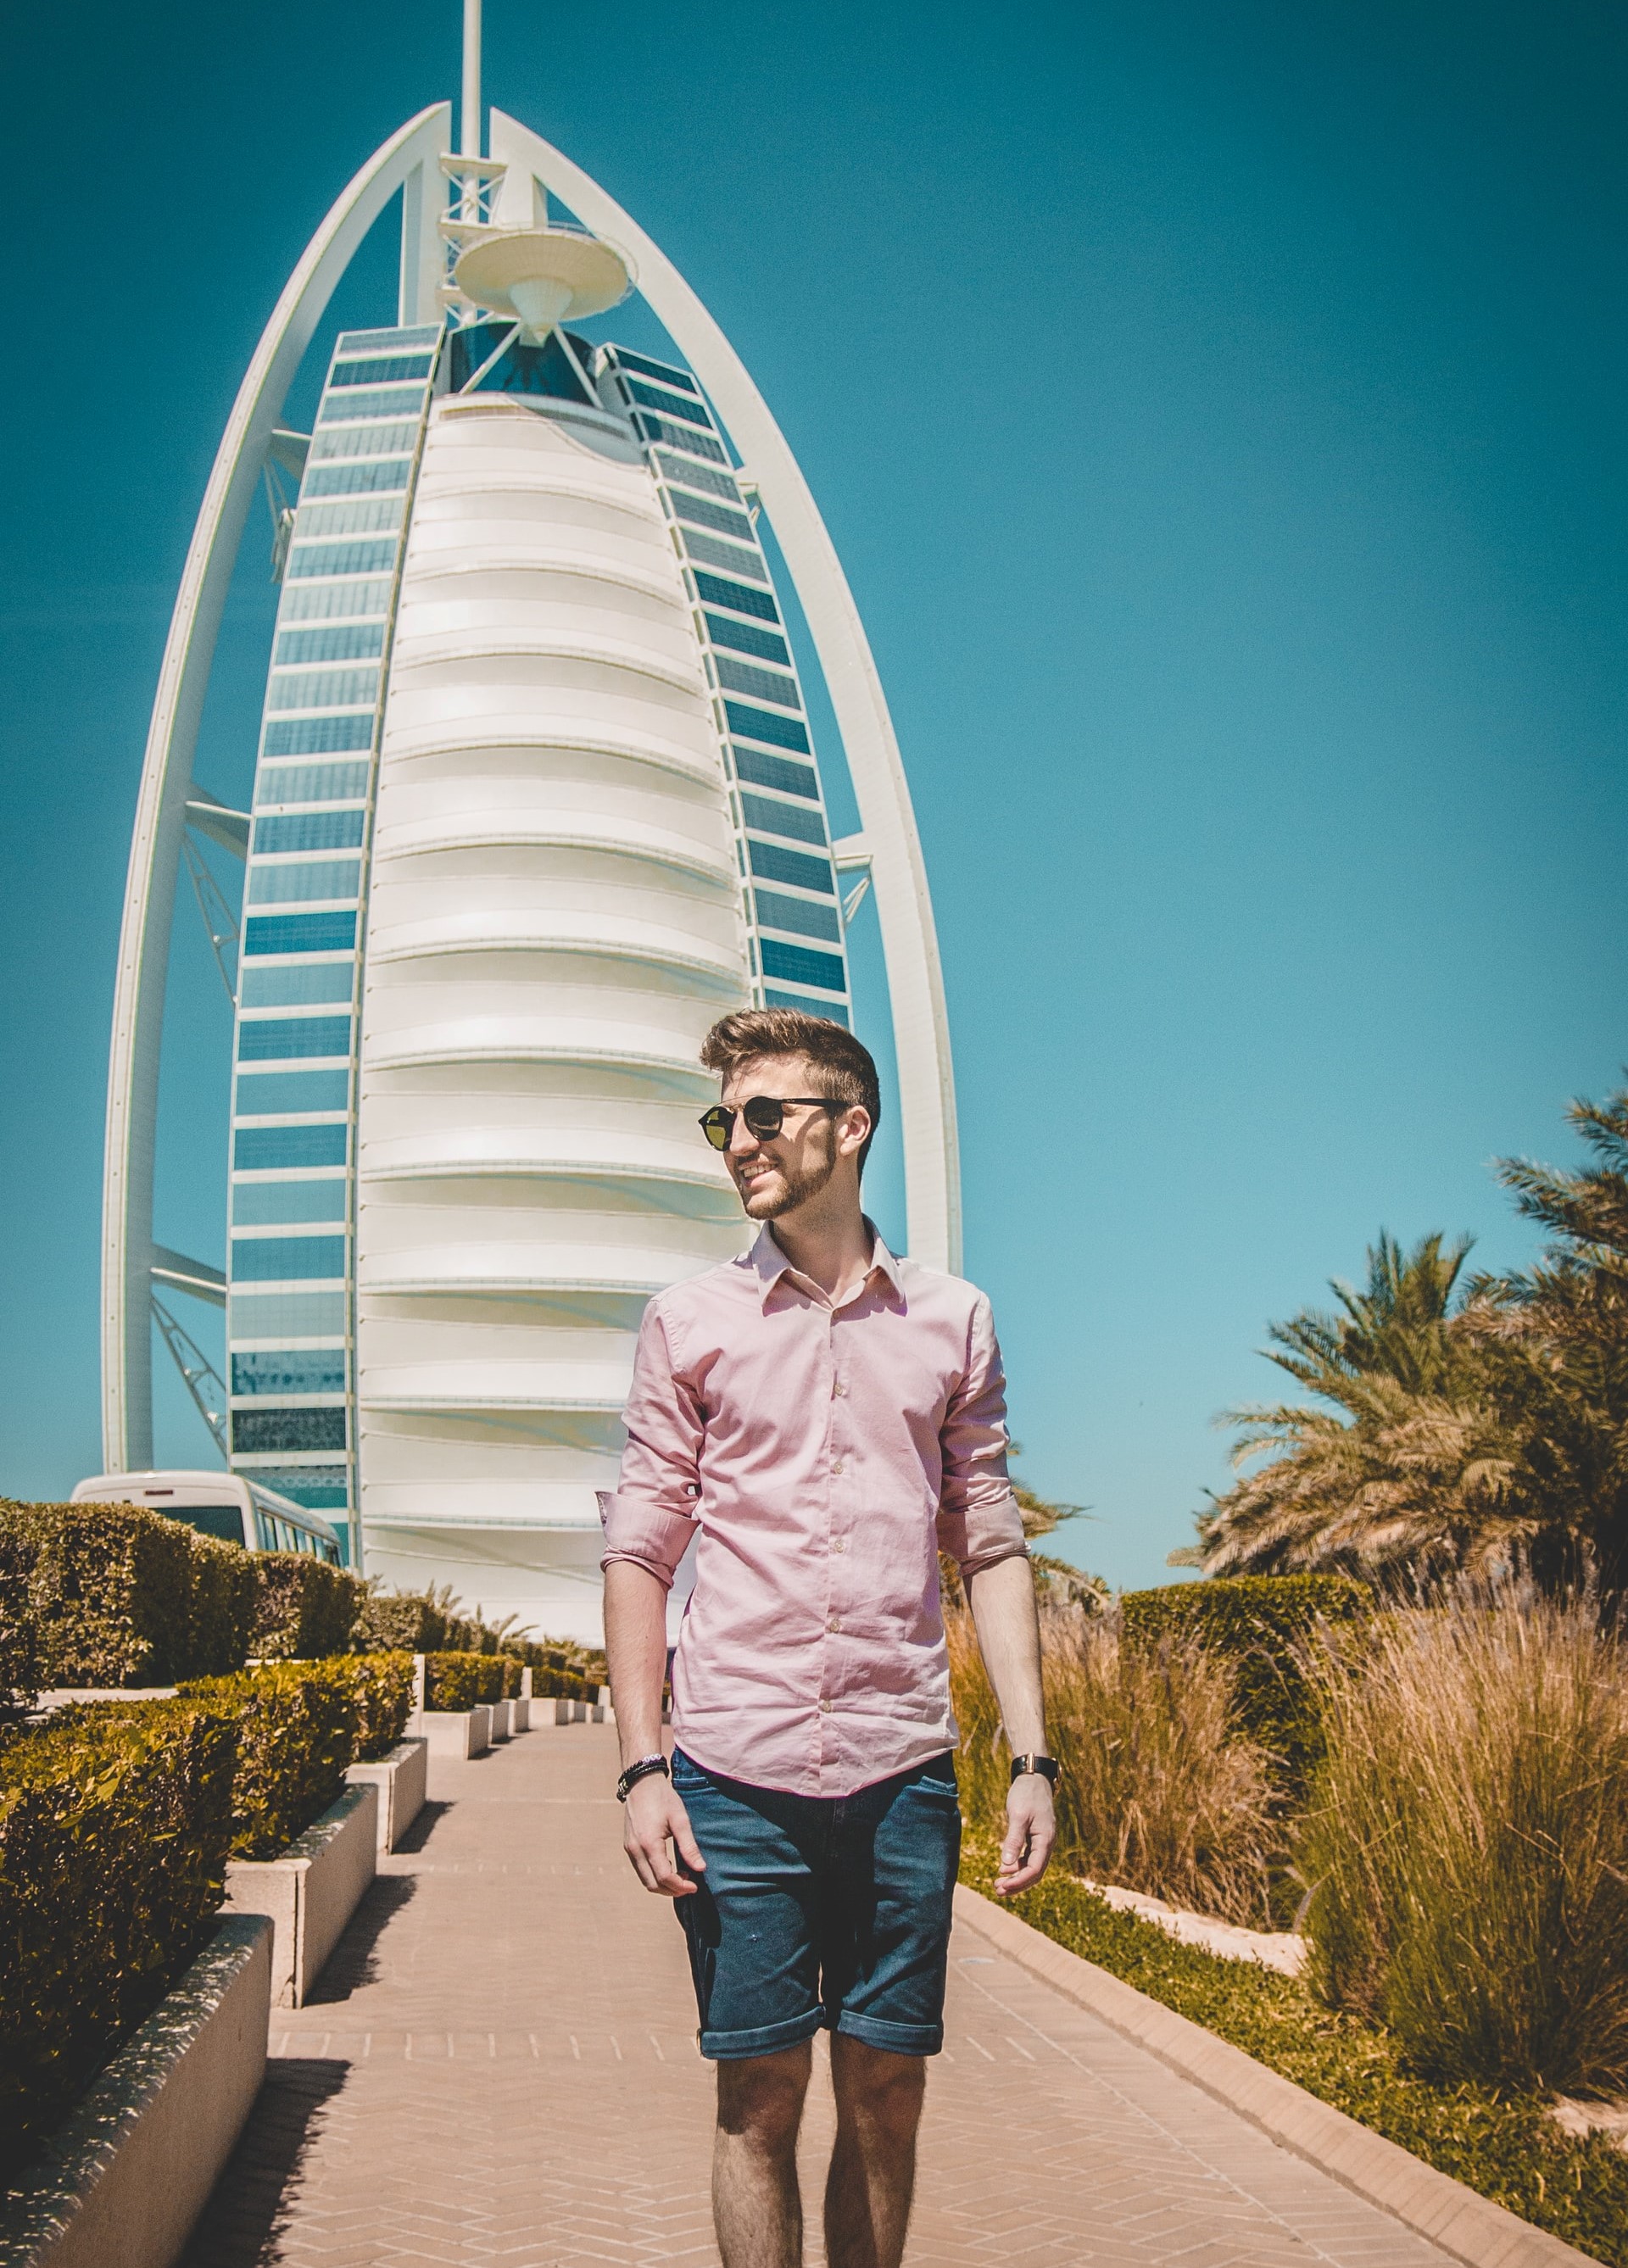 Student standing in front of a very tall skyscraper in Dubai.